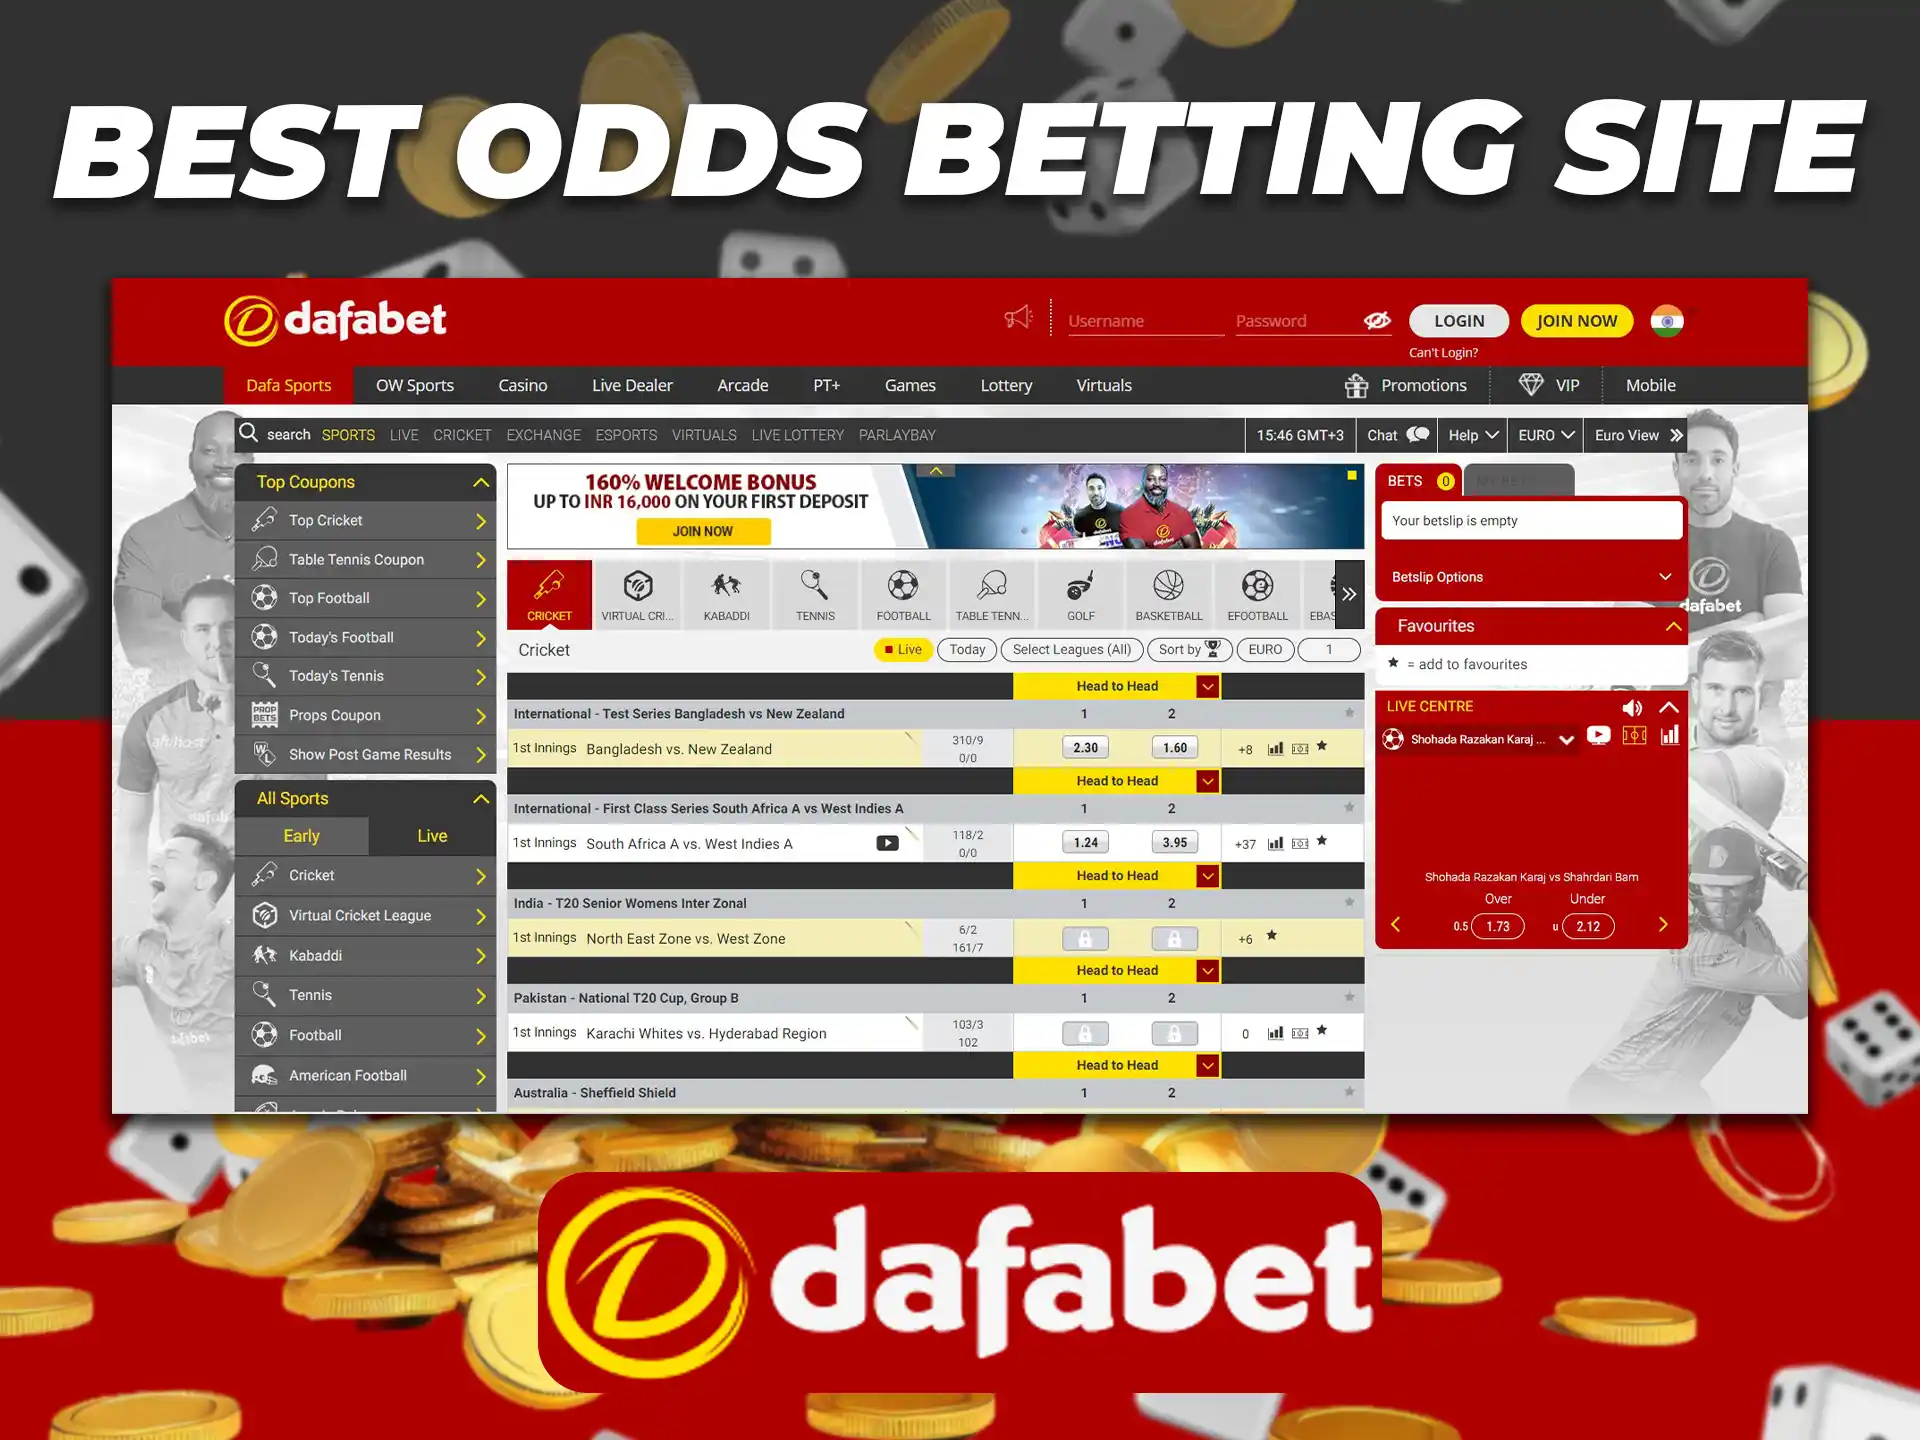 A wide selection of bets on many popular sports with a guarantee of the best odds you can find on the Dafabet website.